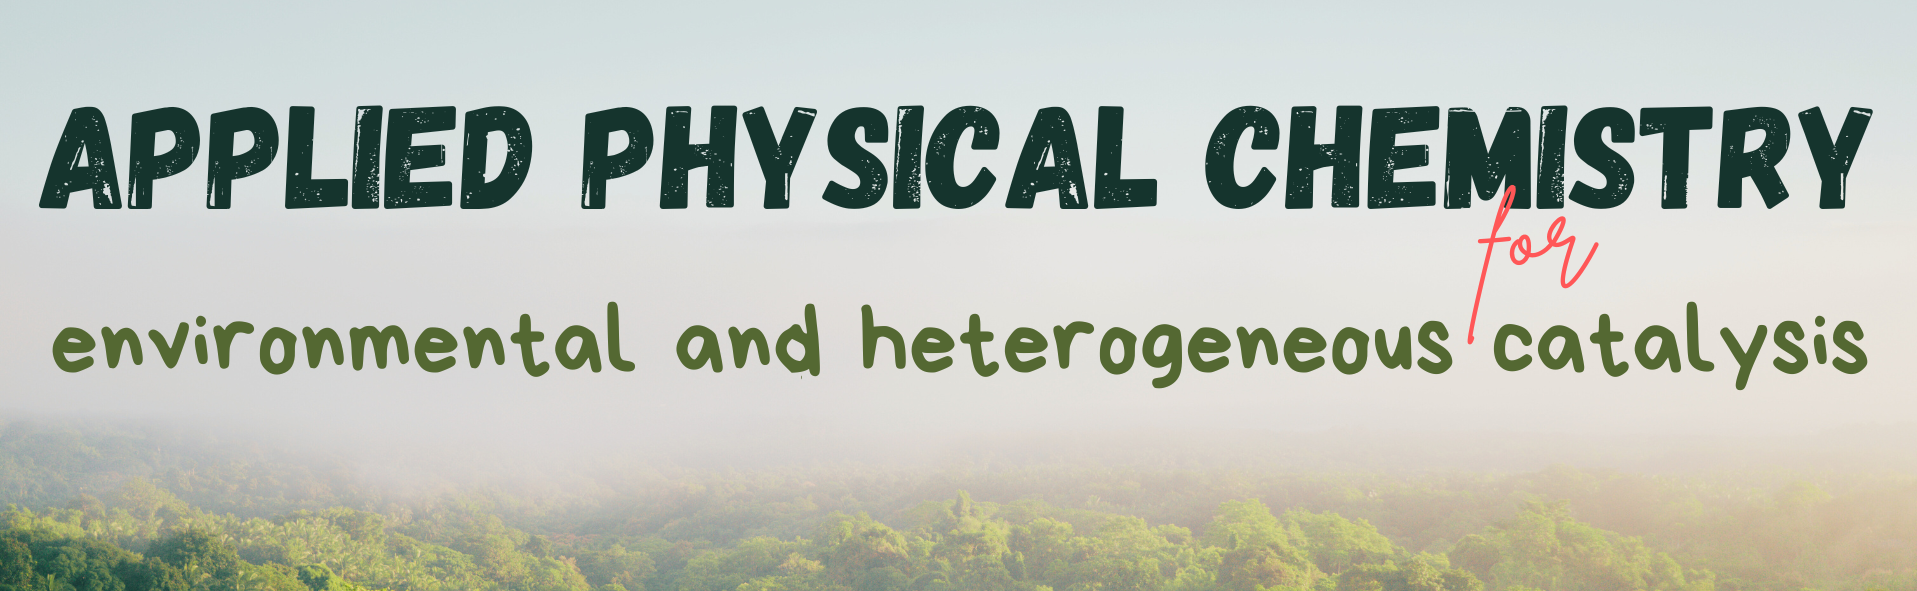 Applied Physical Chemistry for Environmental and Heterogeneous Catalysis